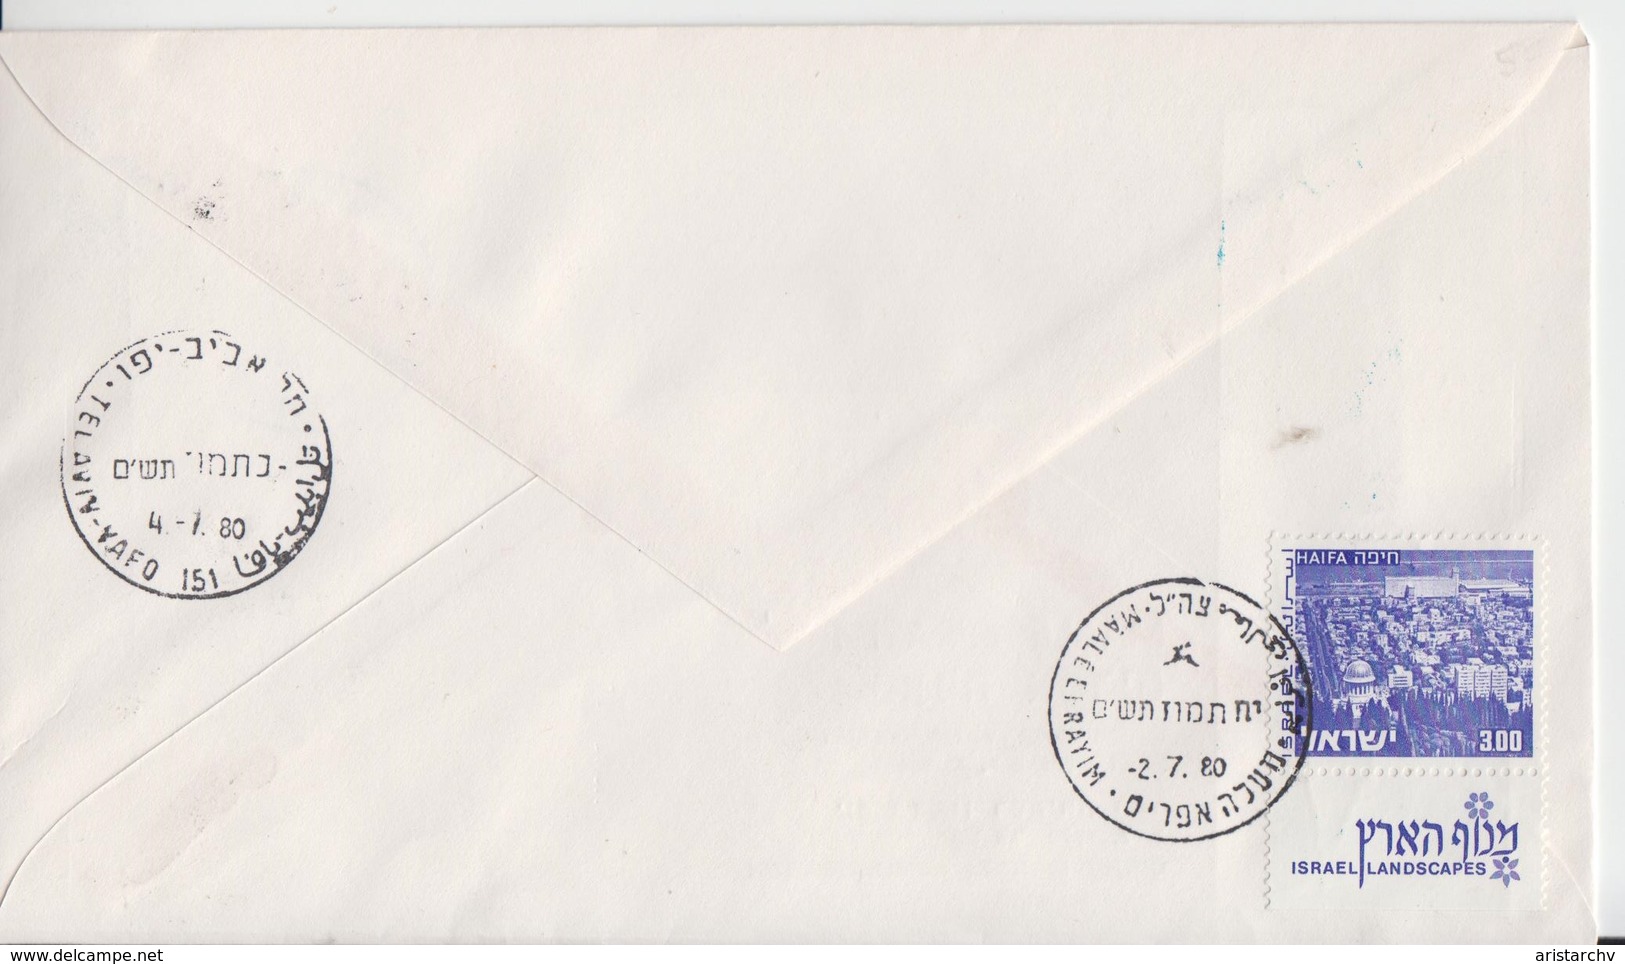 ISRAEL 1979 MAALE EFRAYIM OPENING DAY POST OFFICE UNDER MILITARY ADMINISTRATION TZAHAL IDF REGISTERED COVER - Postage Due